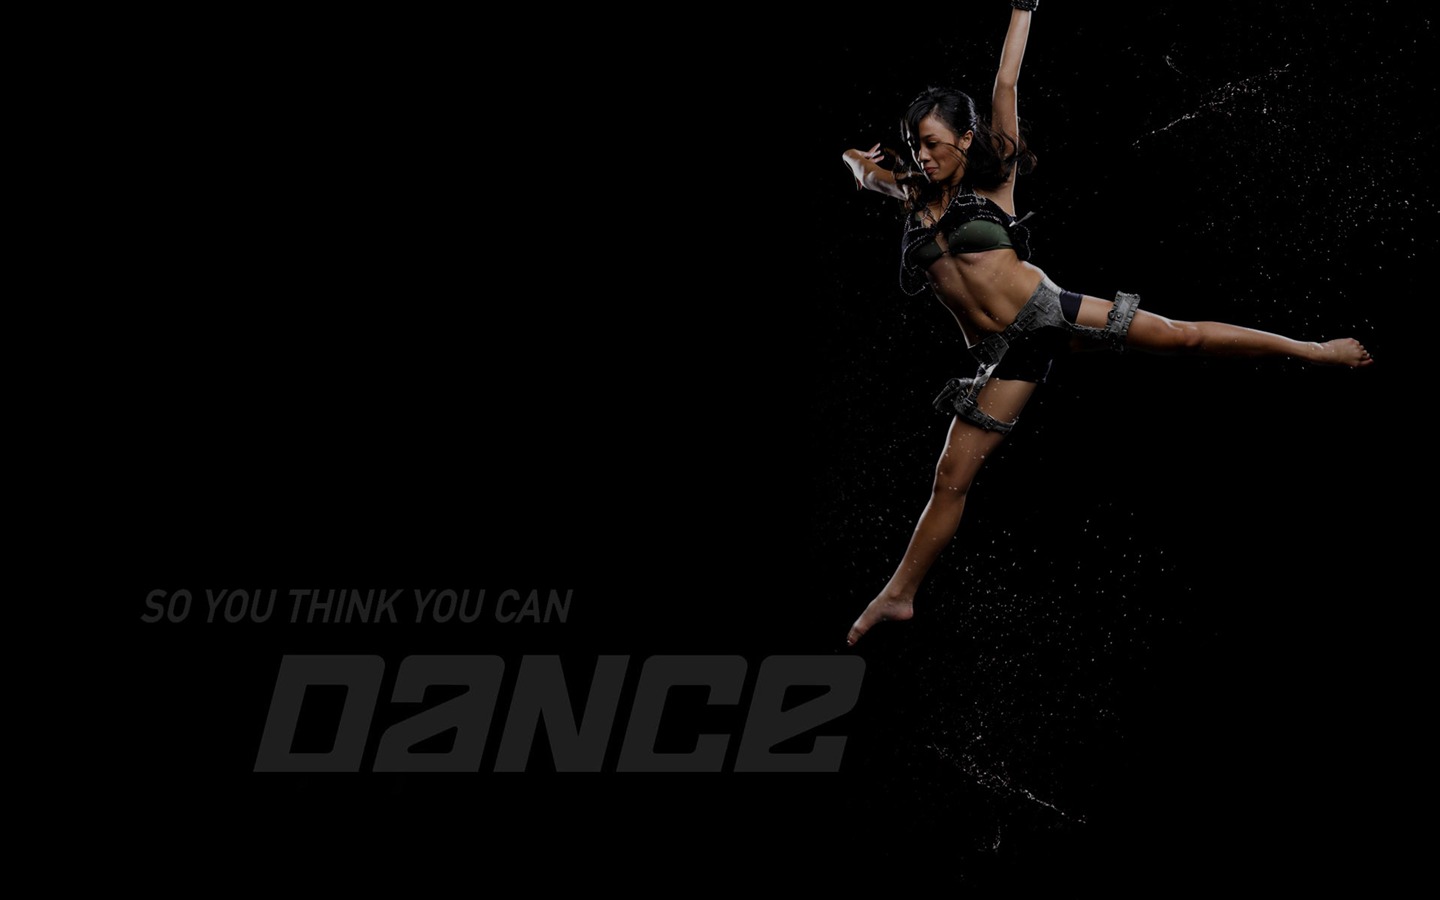 So You Think You Can Dance wallpaper (2) #3 - 1440x900